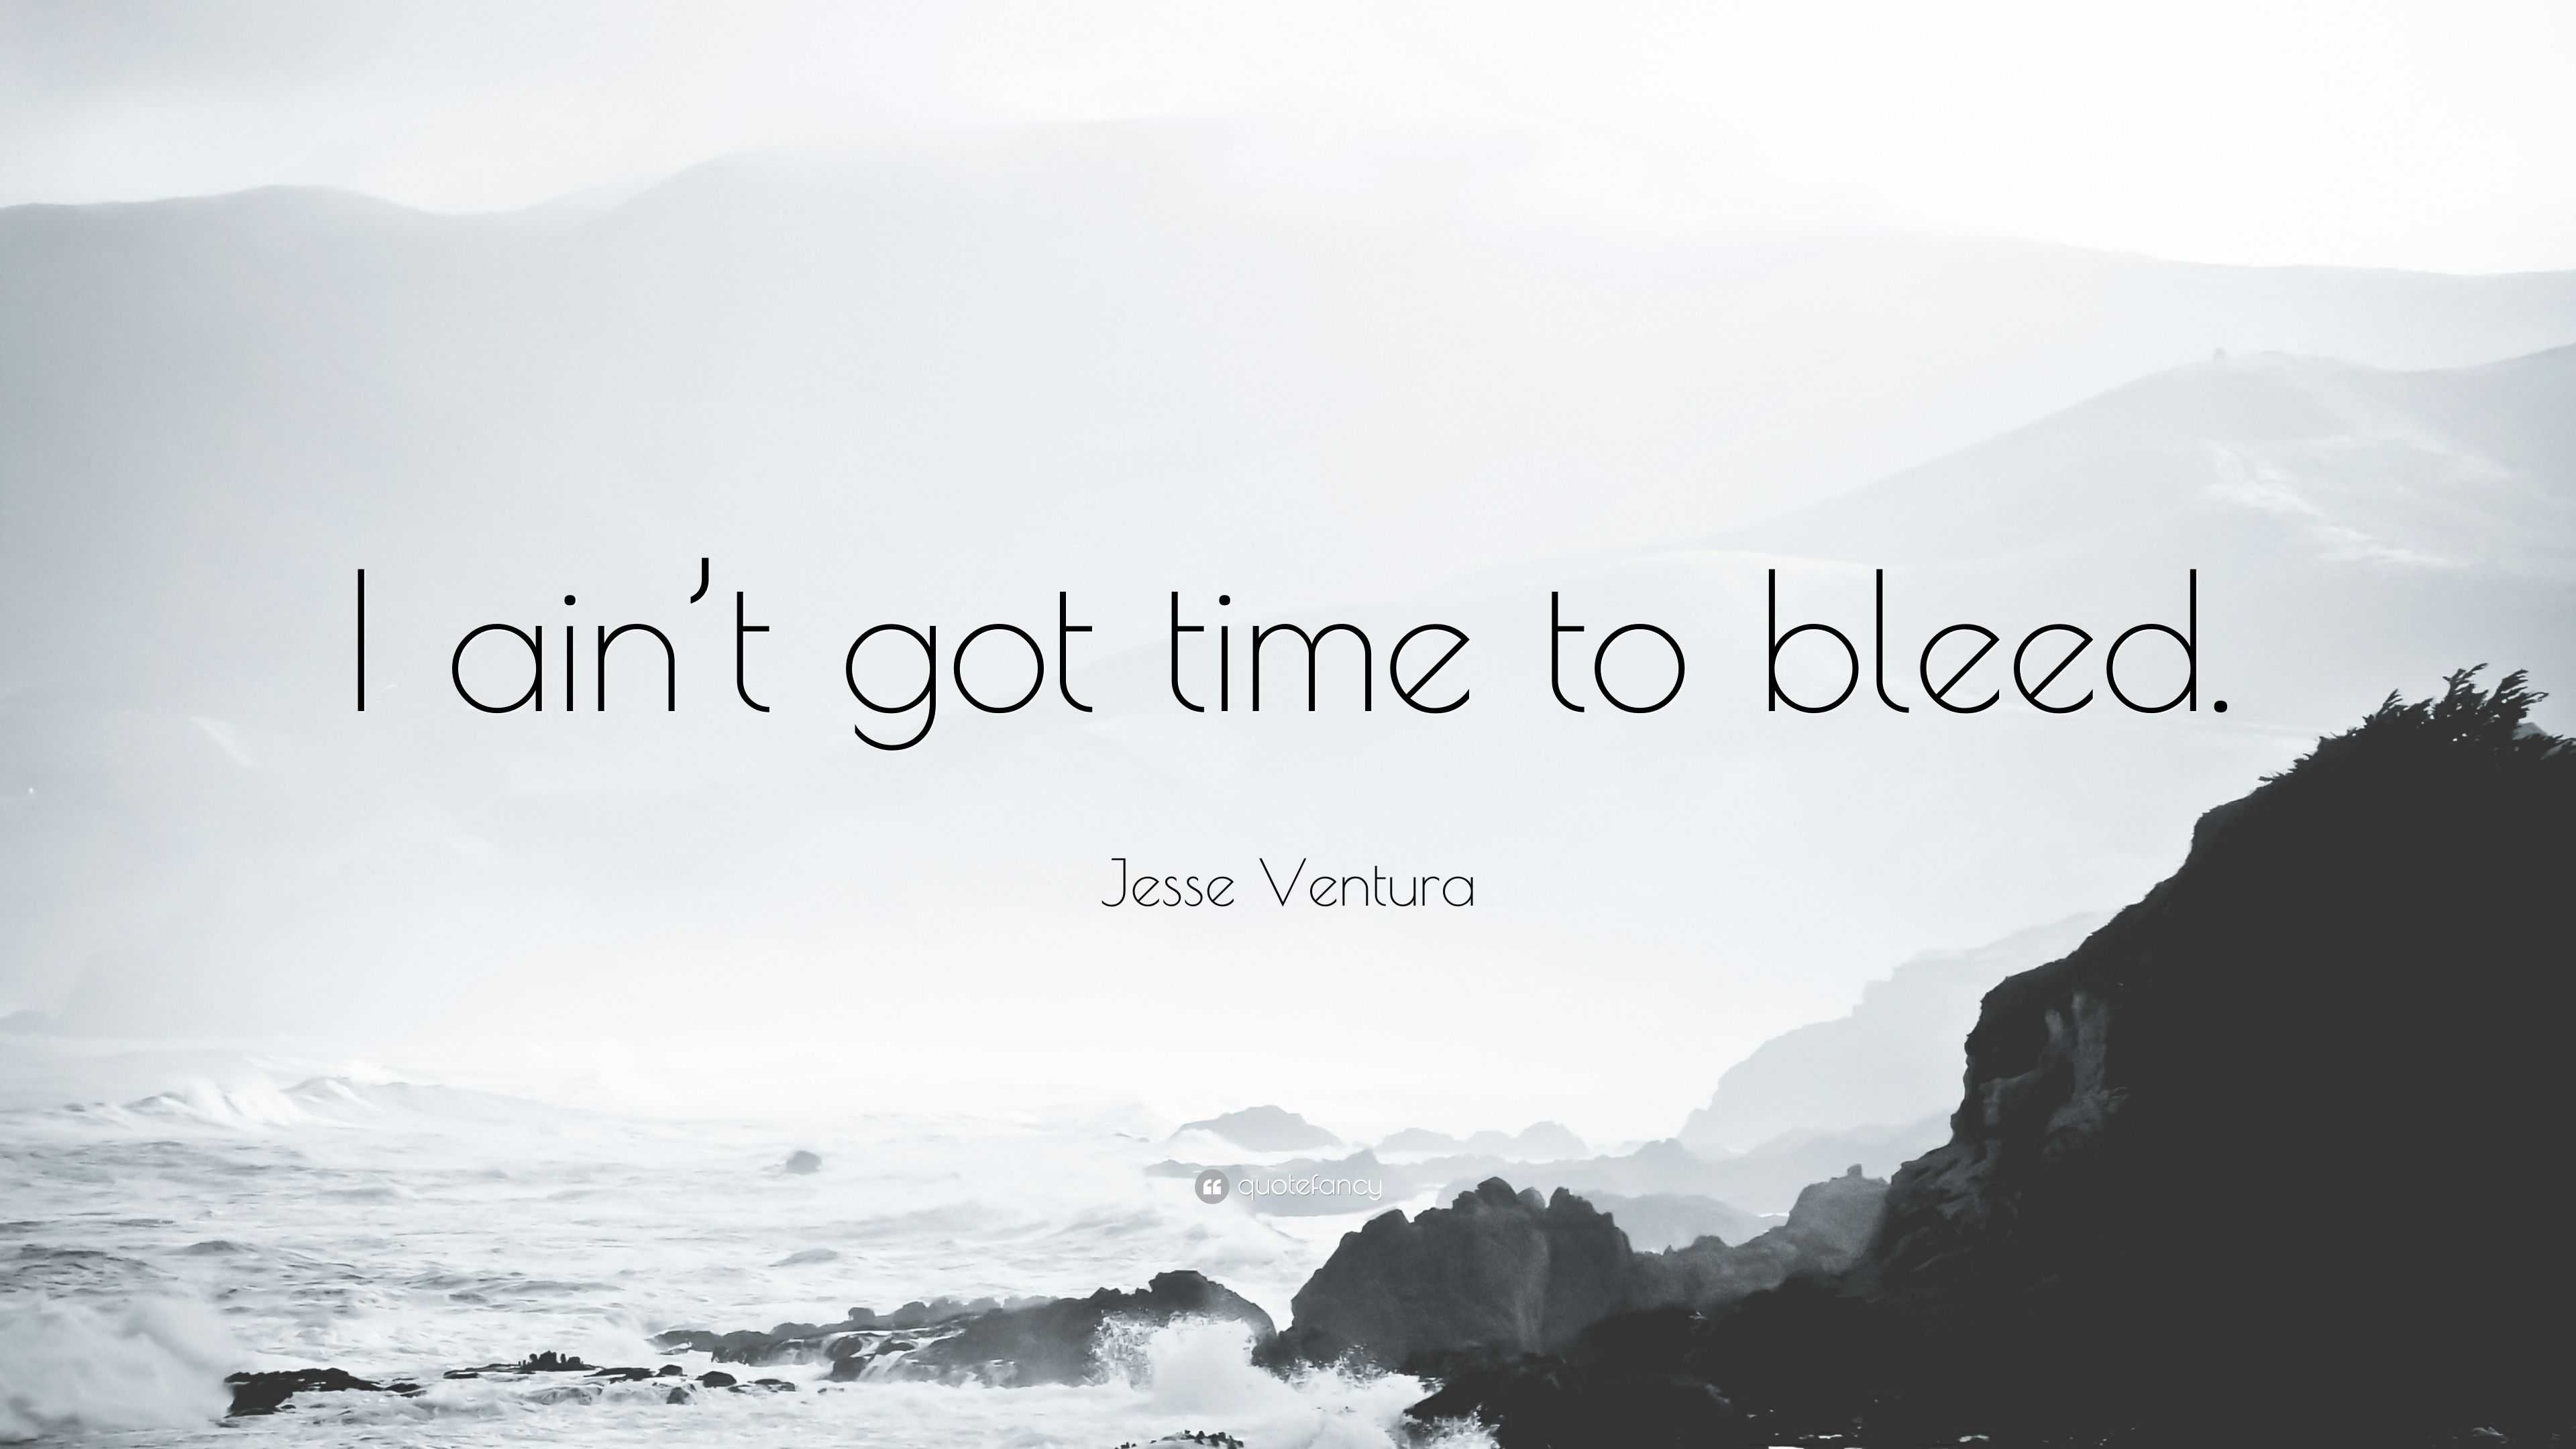 Jesse Ventura Quote: “I ain't got time to bleed.”